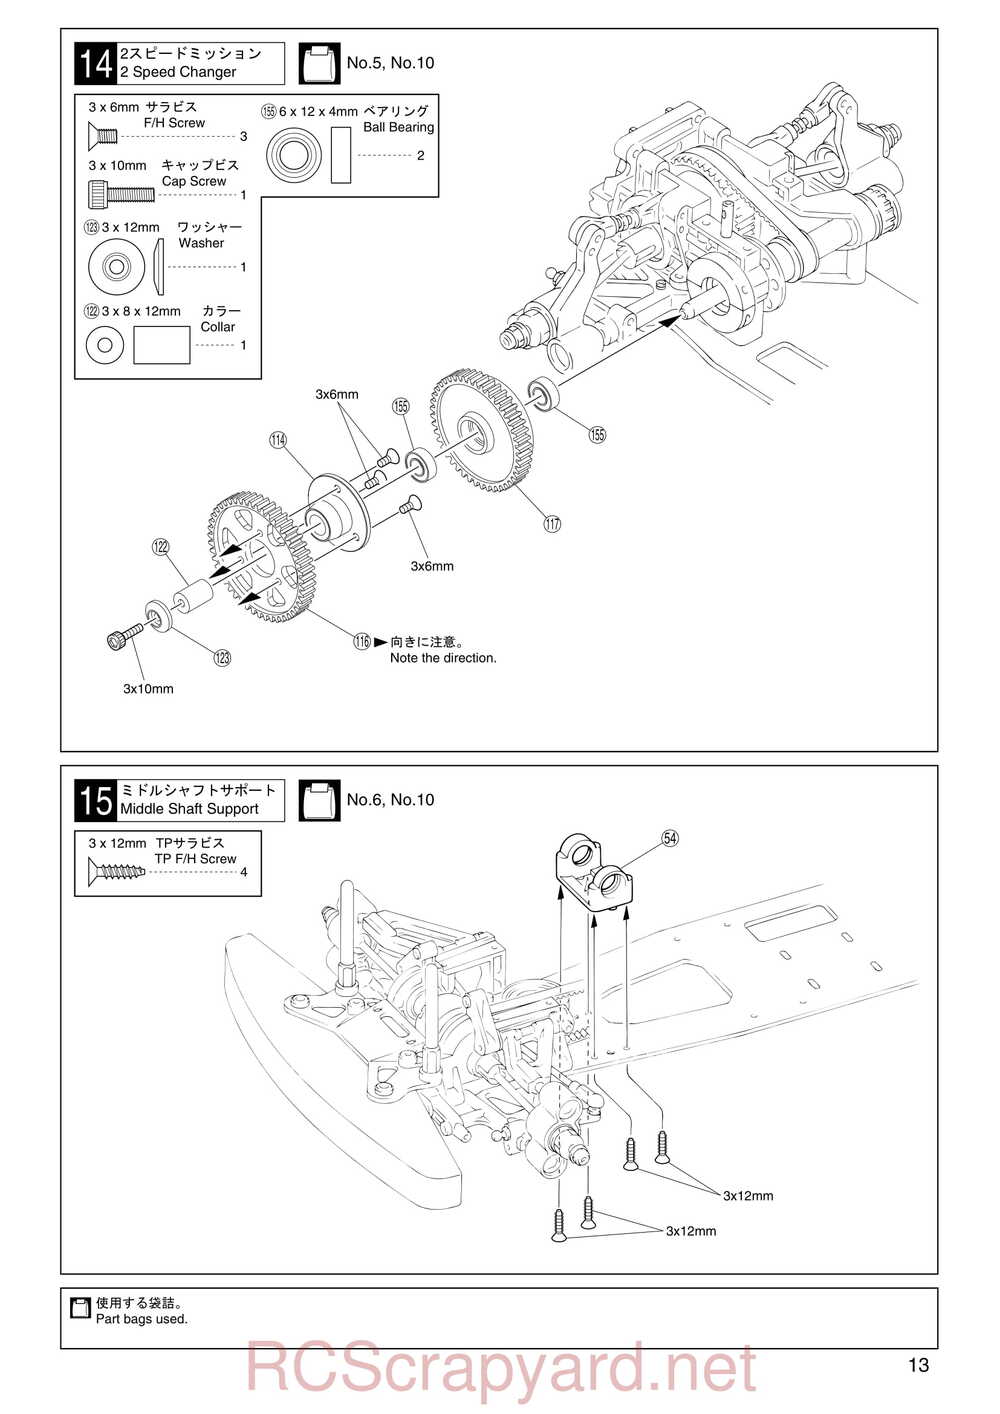 Kyosho - 31011 - V-One R - Manual - Page 13